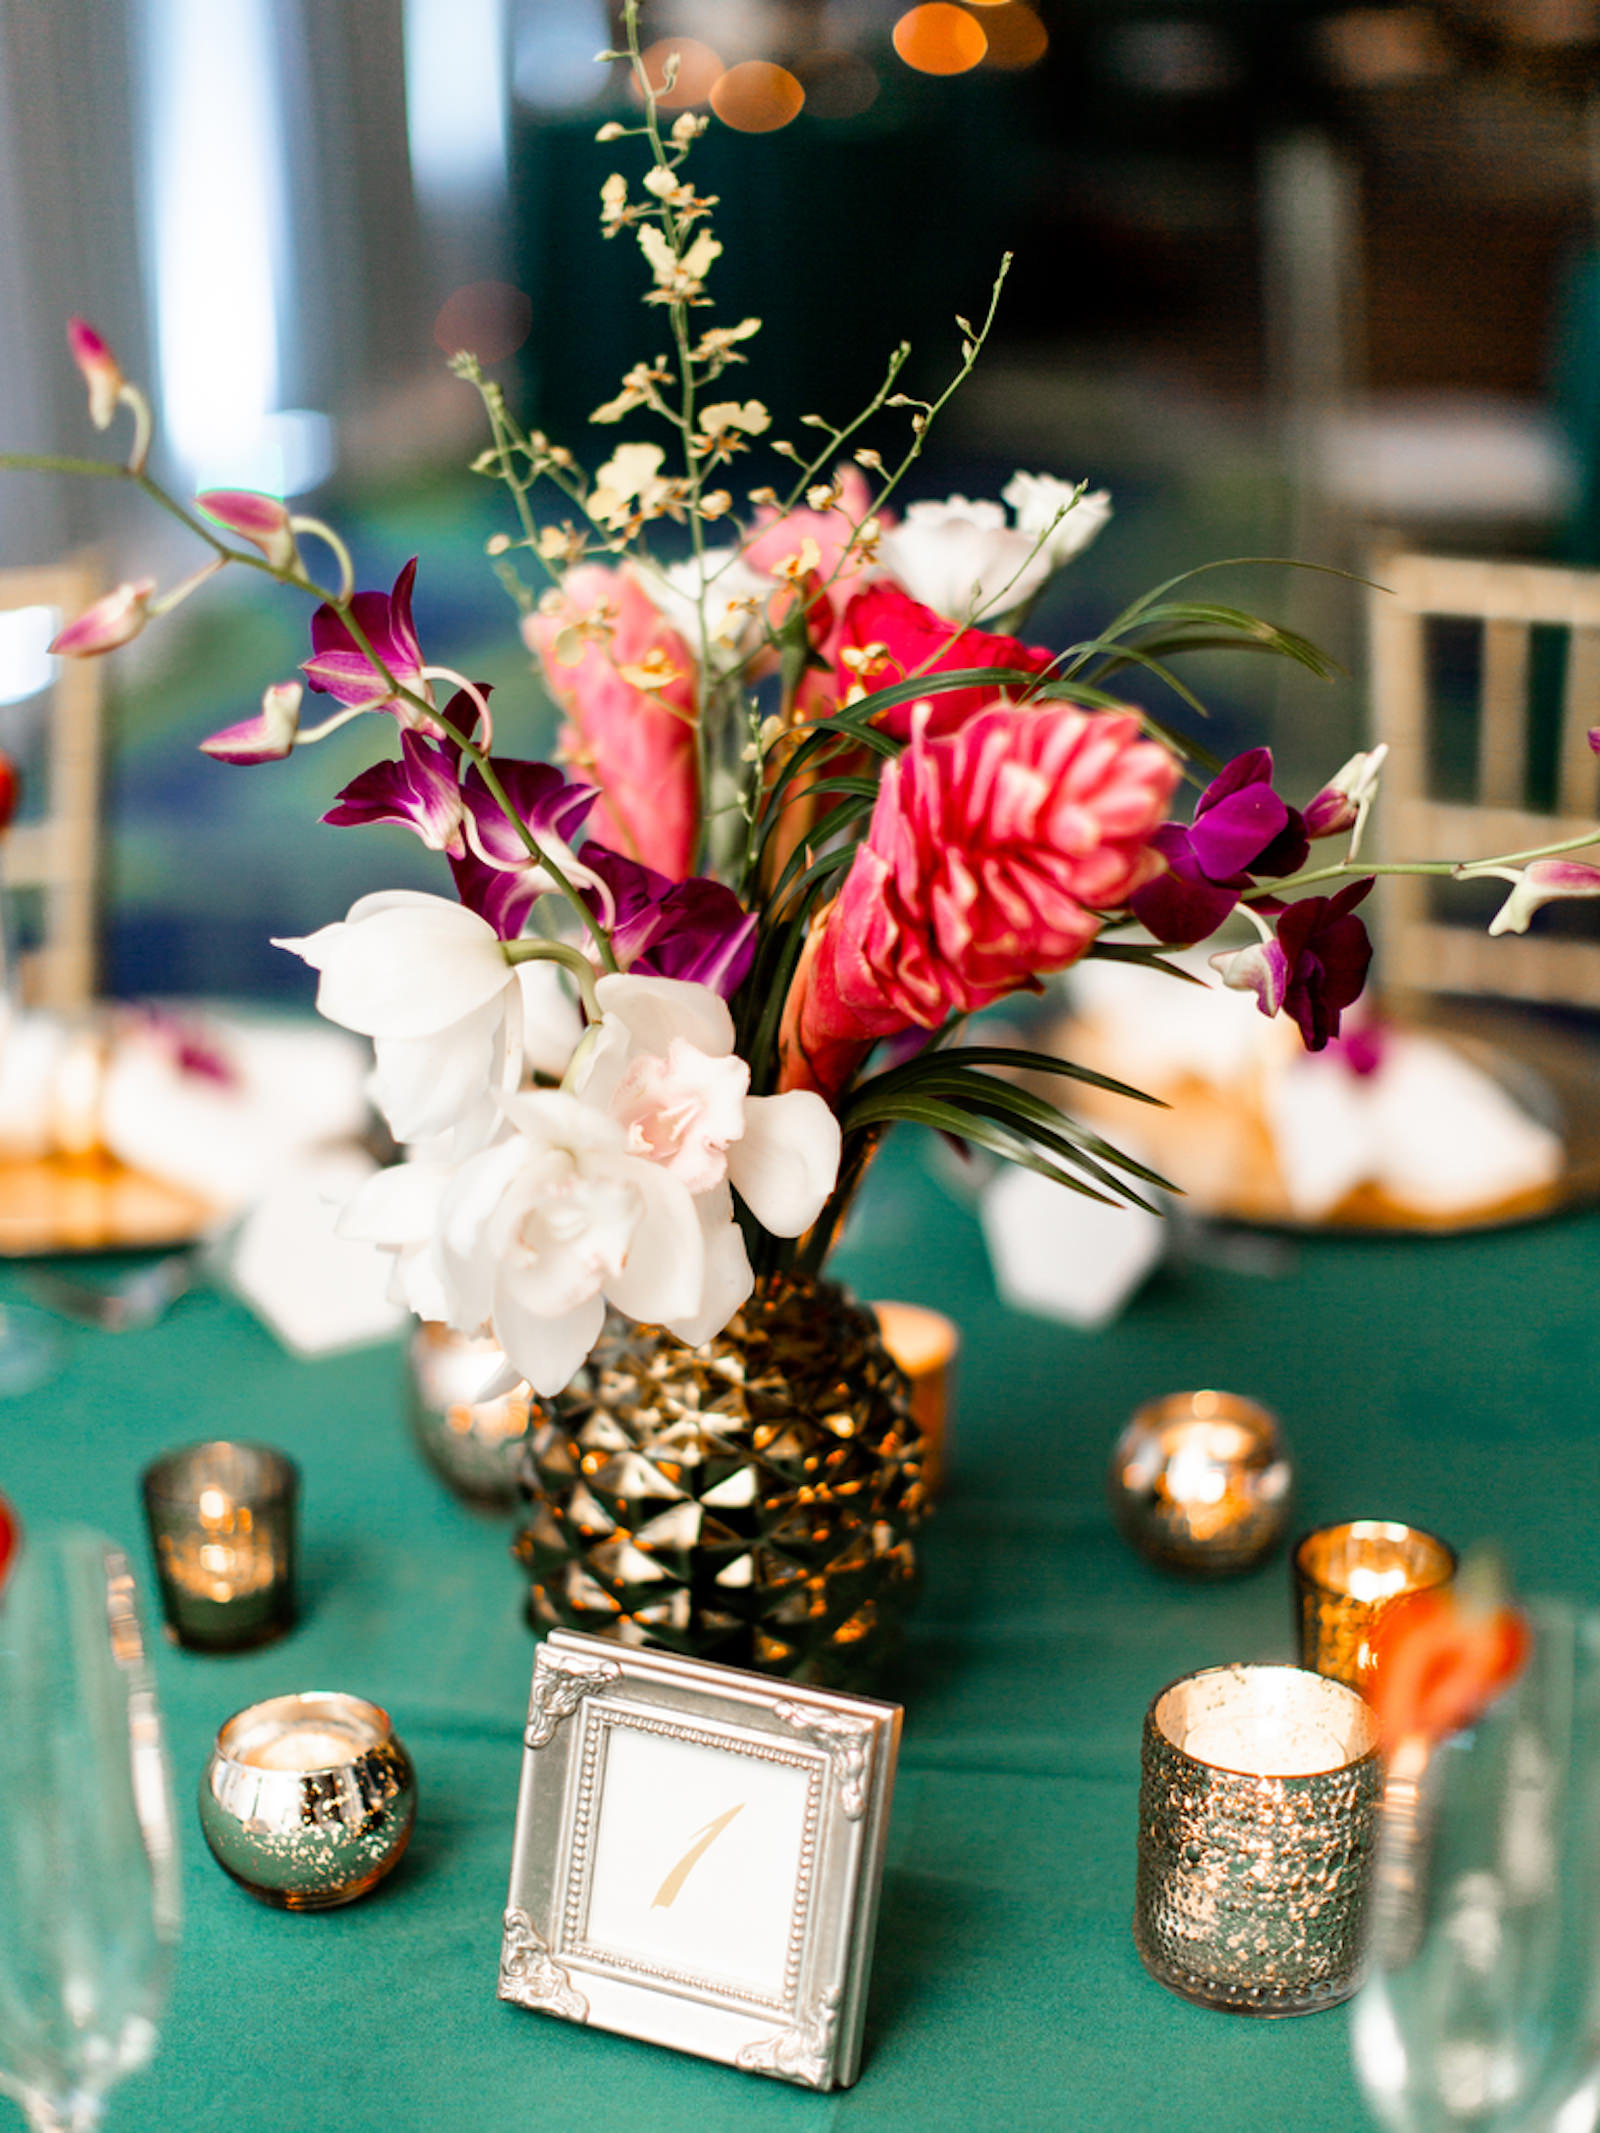 Tropical Elegant Wedding Reception Decor, Teal Tablecloth, Gold Painted Pineapple with Pink Ginver, White and Purple Flowers, Gold Mercury Candles | Tampa Bay Wedding Planner Special Moments Event Planning | Clearwater Beach Opal Sands Resort